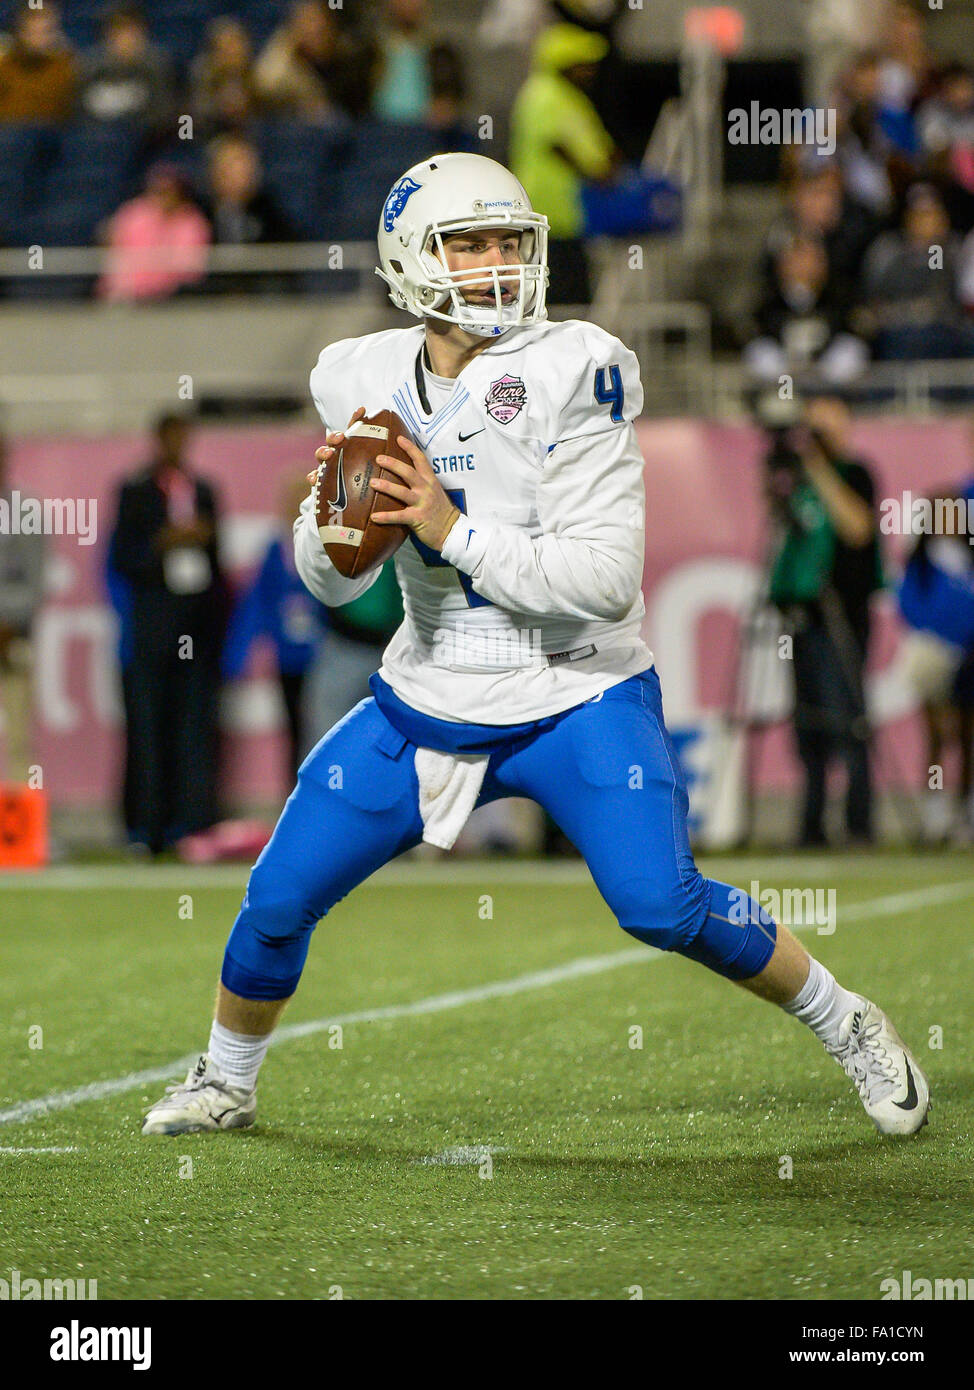 Orlando, FL, USA. 19th Dec, 2015. Georgia State Panthers quarterback Nick Arbuckle (4) during 1st half action in the Inaugural AutoNation Cure Bowl between the Georgia State Panthers and the San Jose State Spartans at the Citrus Bowl in Orlando, Fl Romeo Guzman/CSM/Alamy Live News Stock Photo